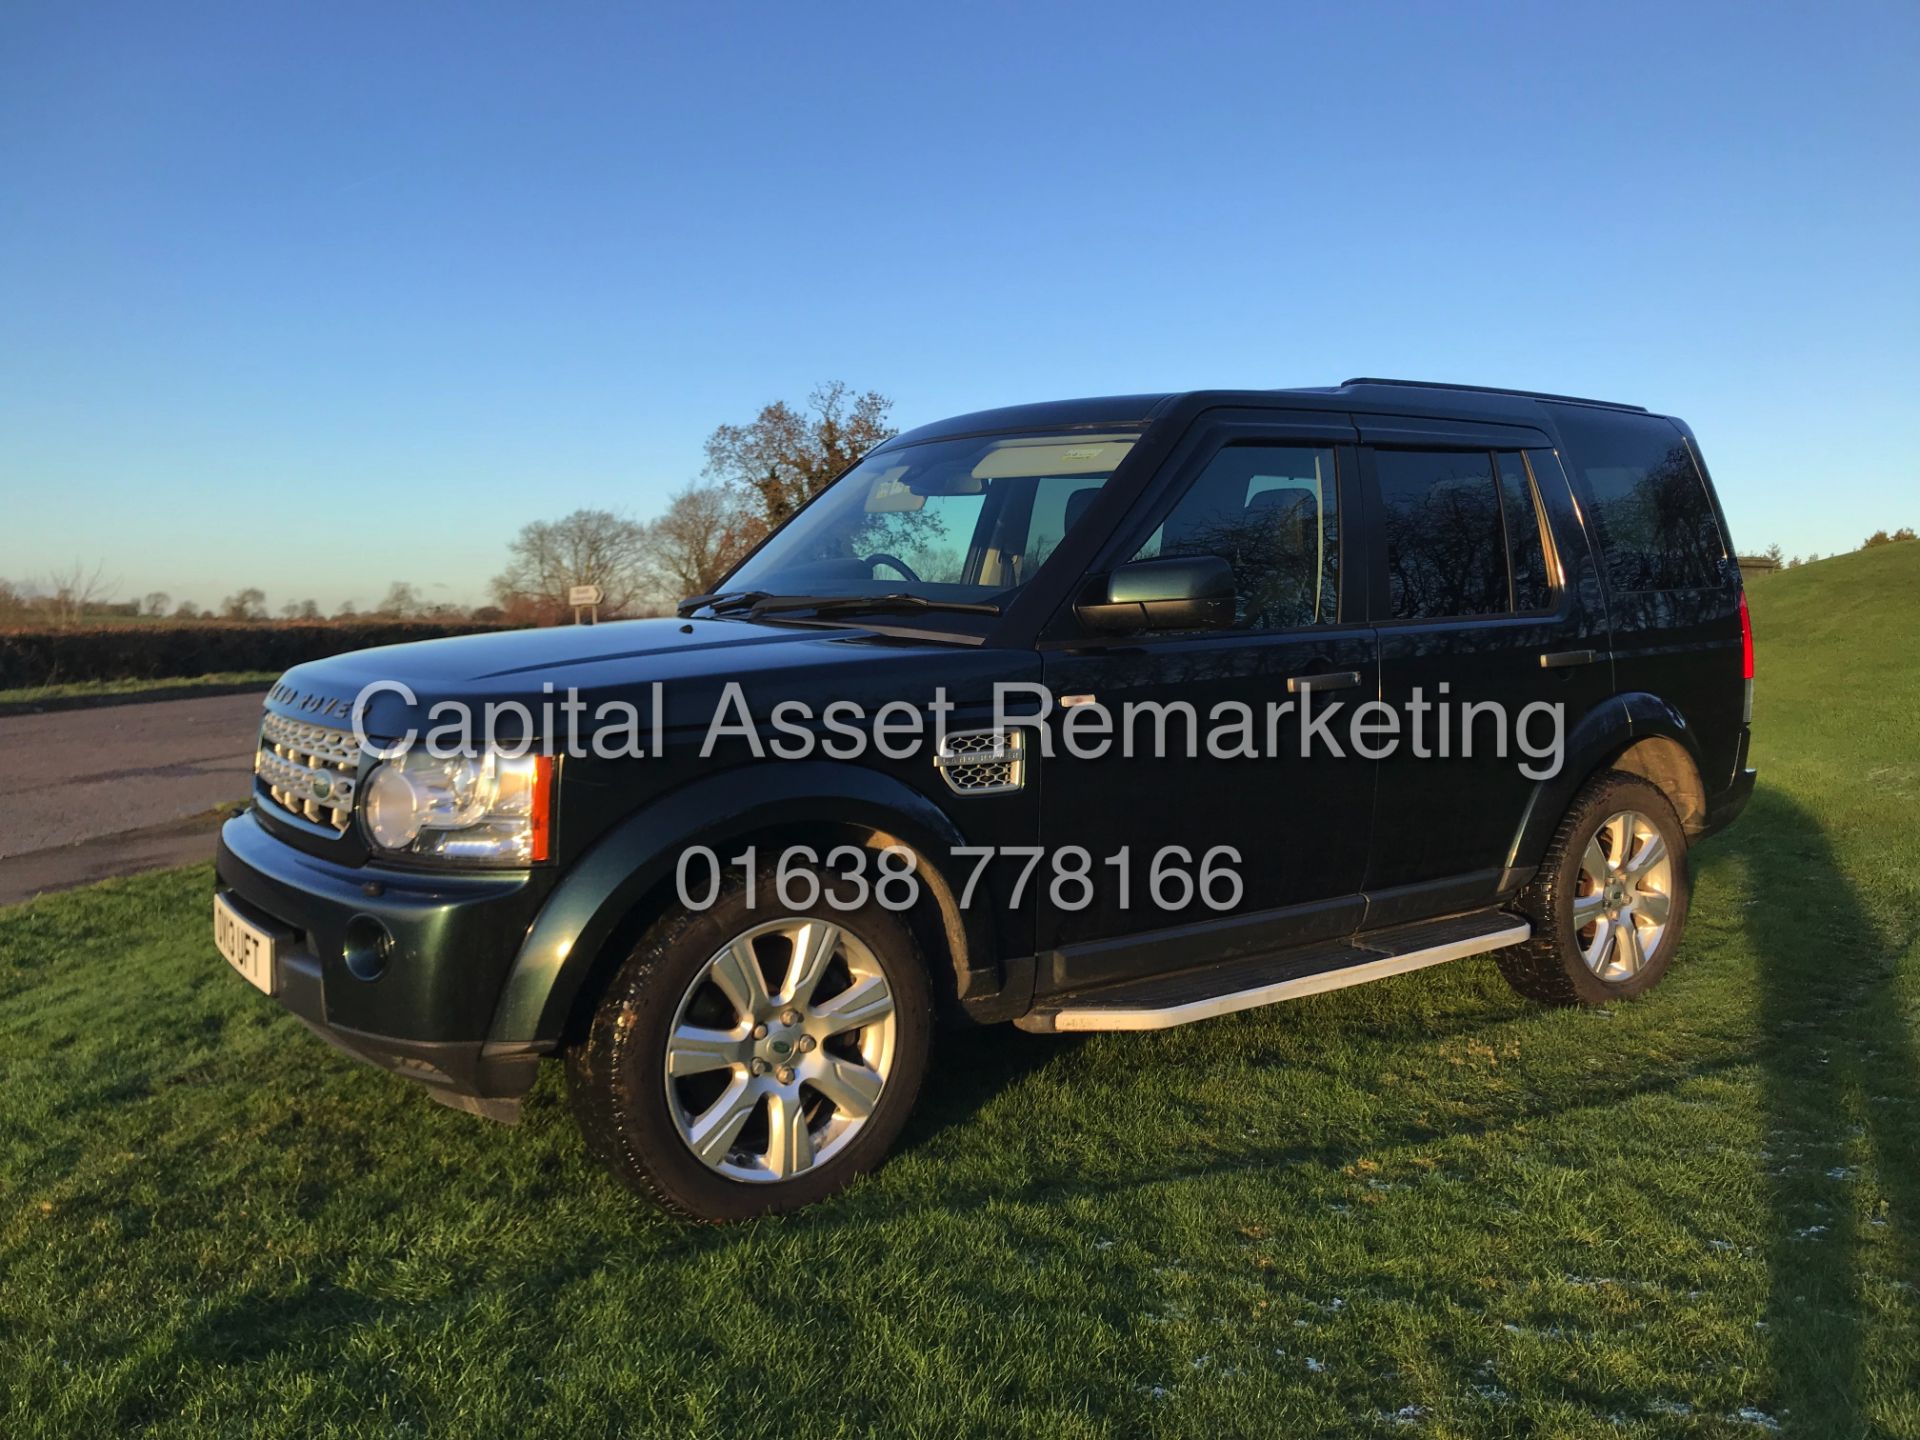 LAND ROVER DISCOVERY 4 "HSE" 3.0 SDV6 AUTOMATIC (13 REG) 7 SEATER **TOP OF THE RANGE** FULLY LOADED